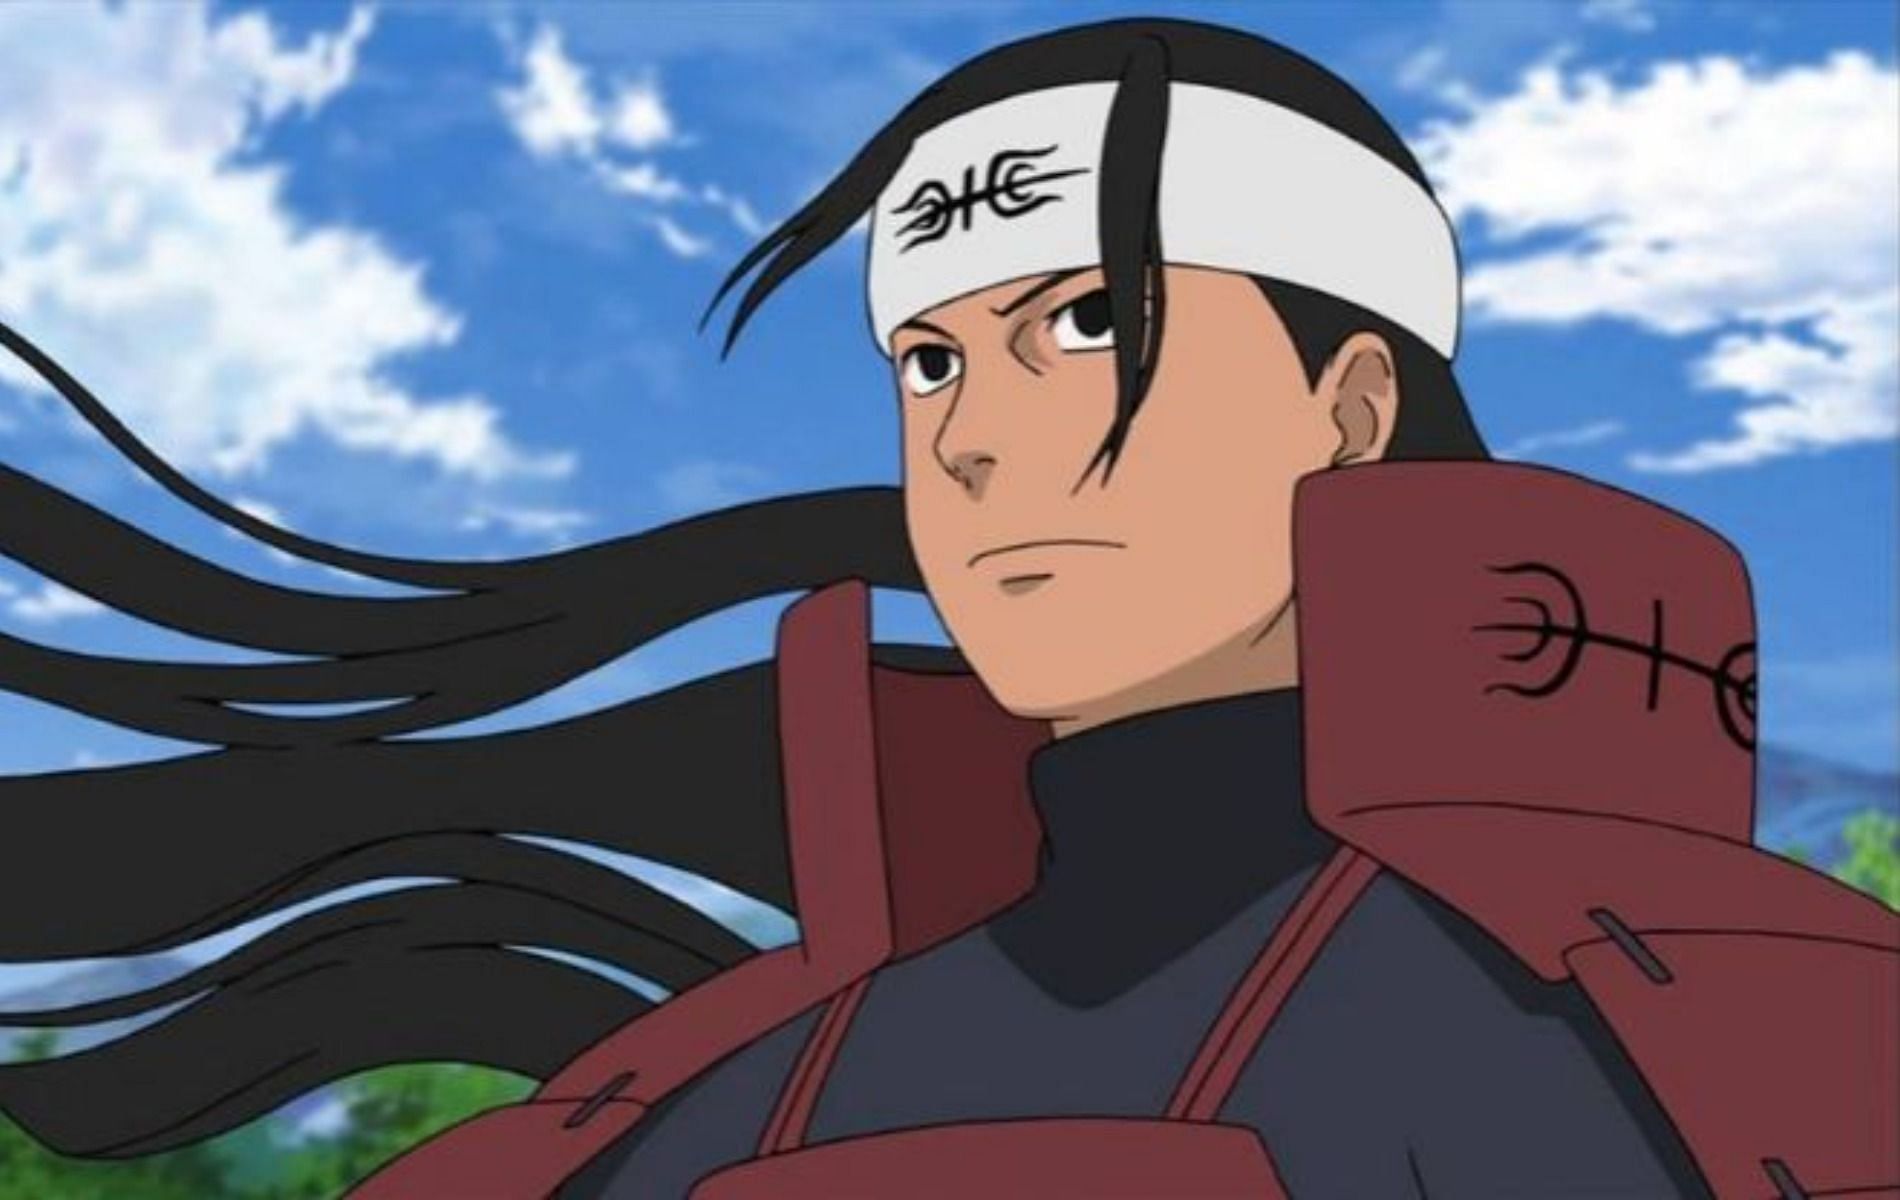 Hashirama was the most powerful during his time (Image via Studio Pierrot)